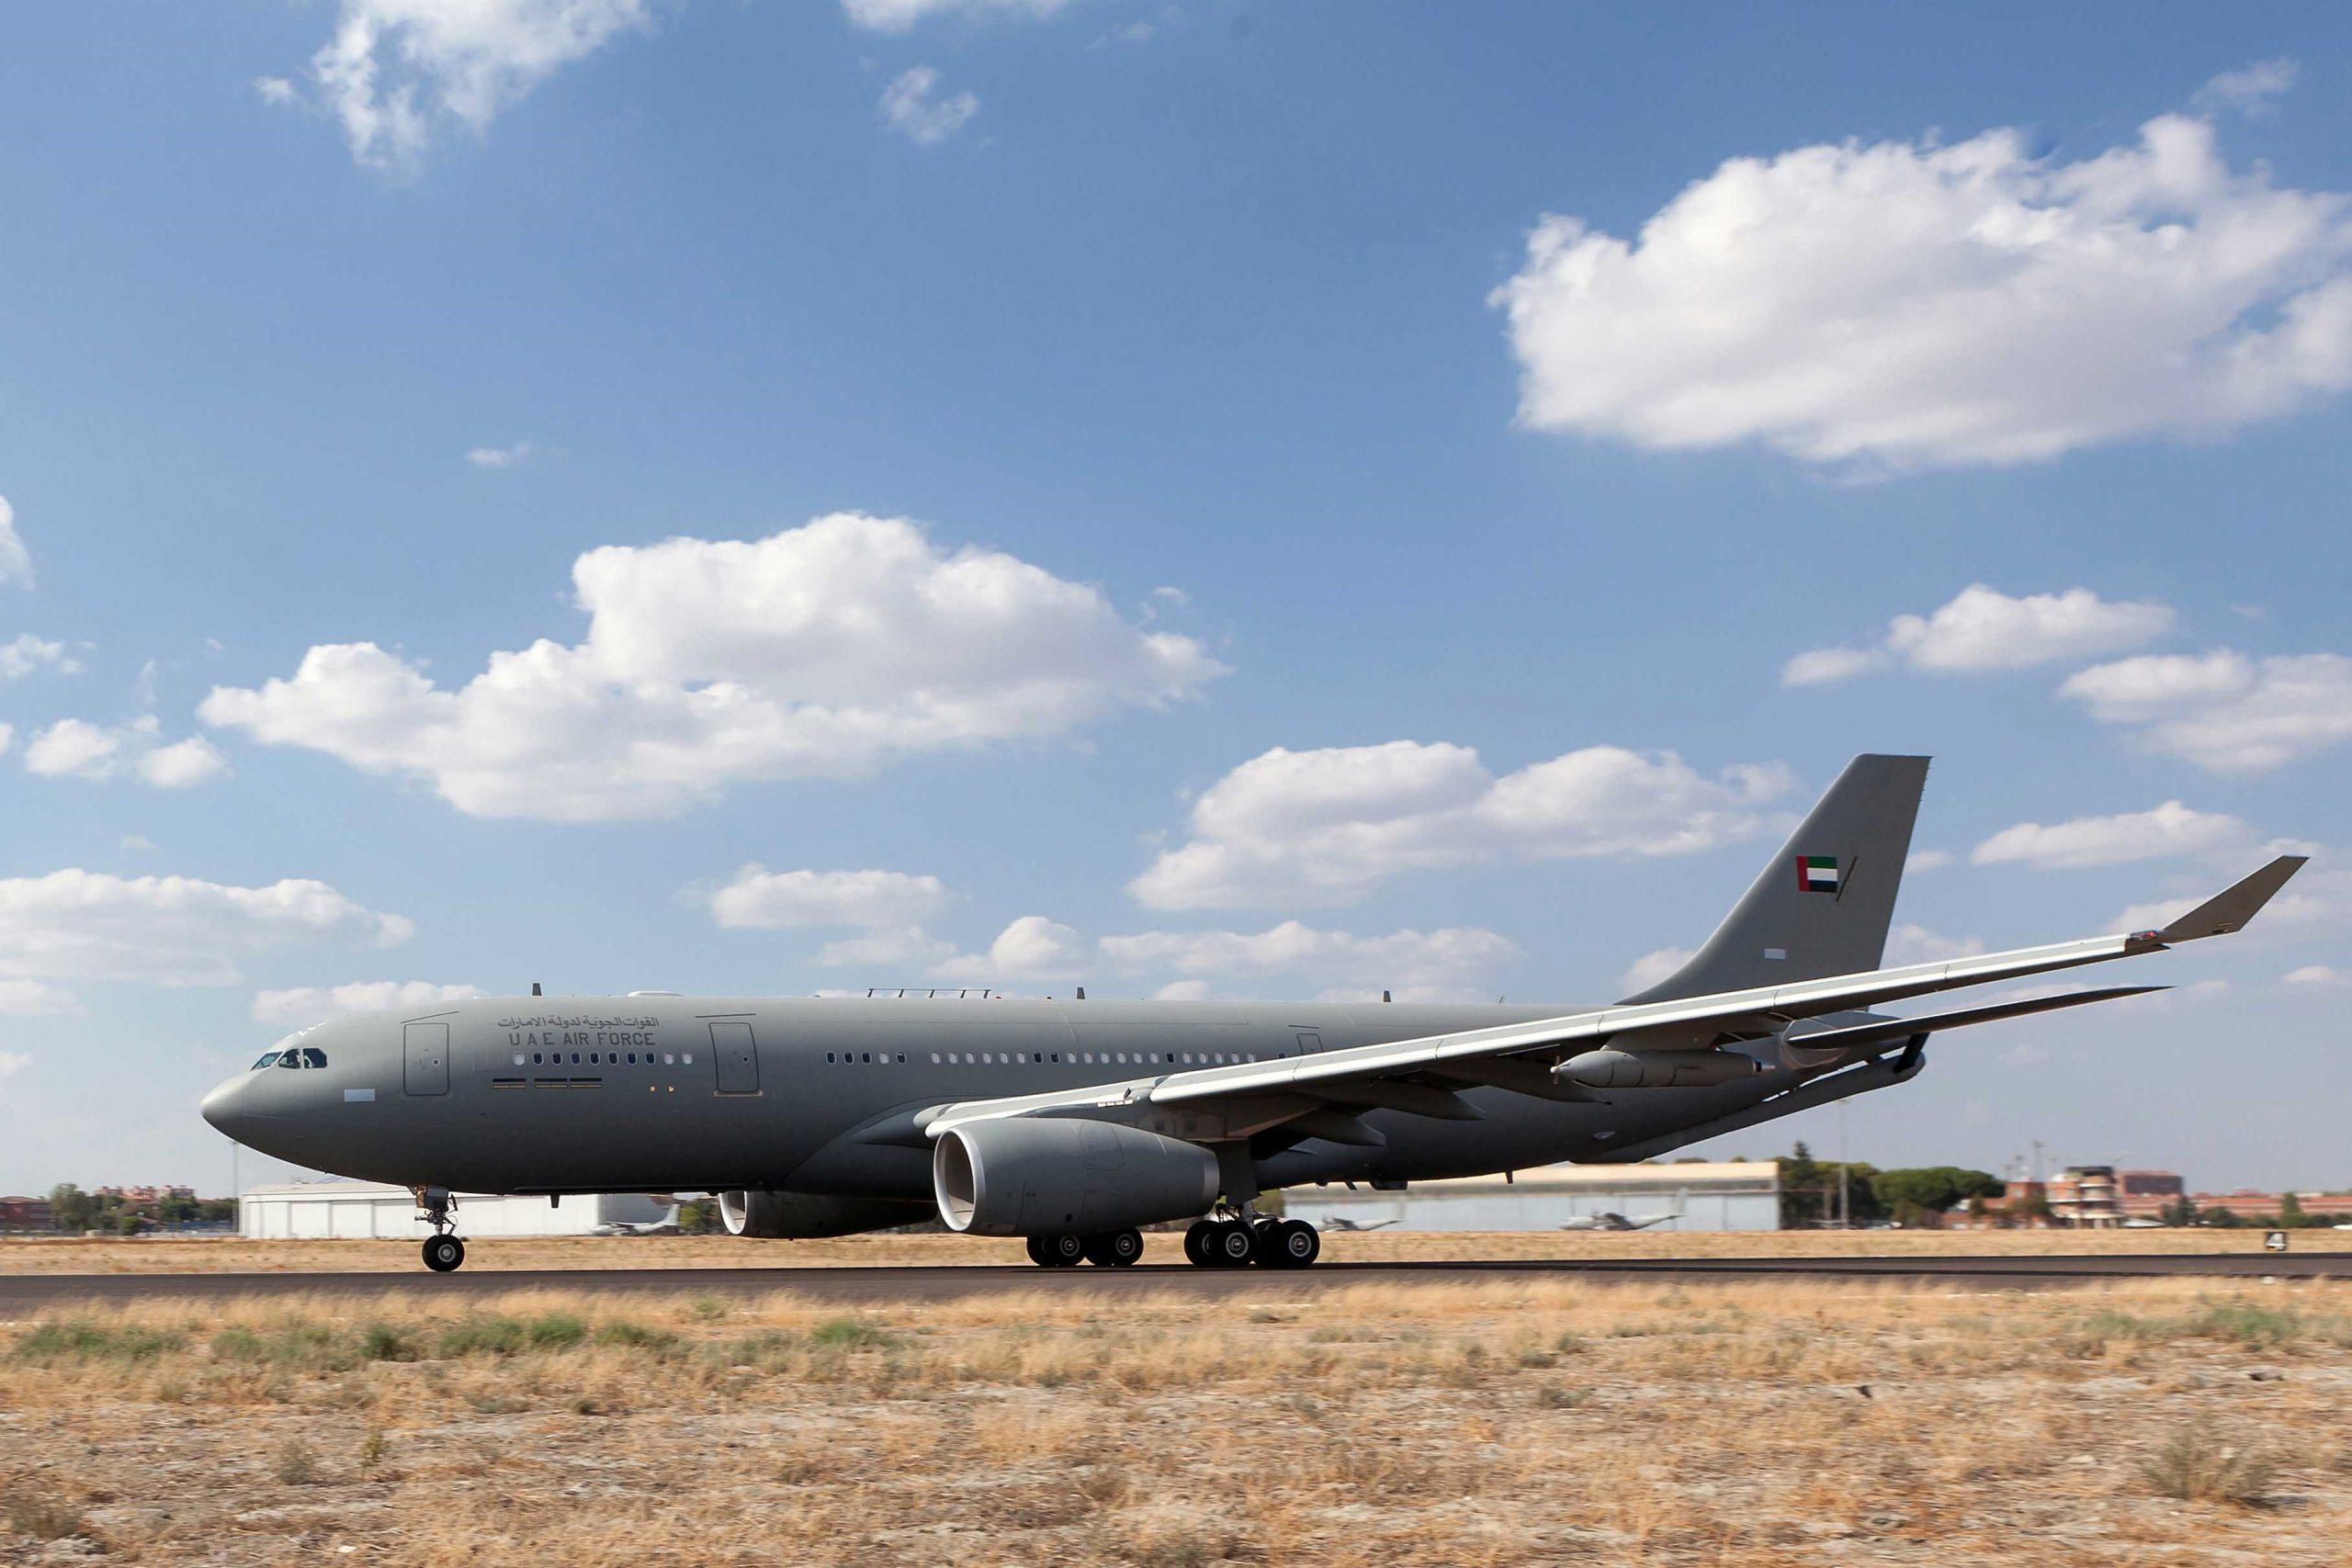 Two additional Airbus A330 Multirole Tanker Transport (MRTT) aircraft have been formally ordered by the UAE Air Force & Air Defence